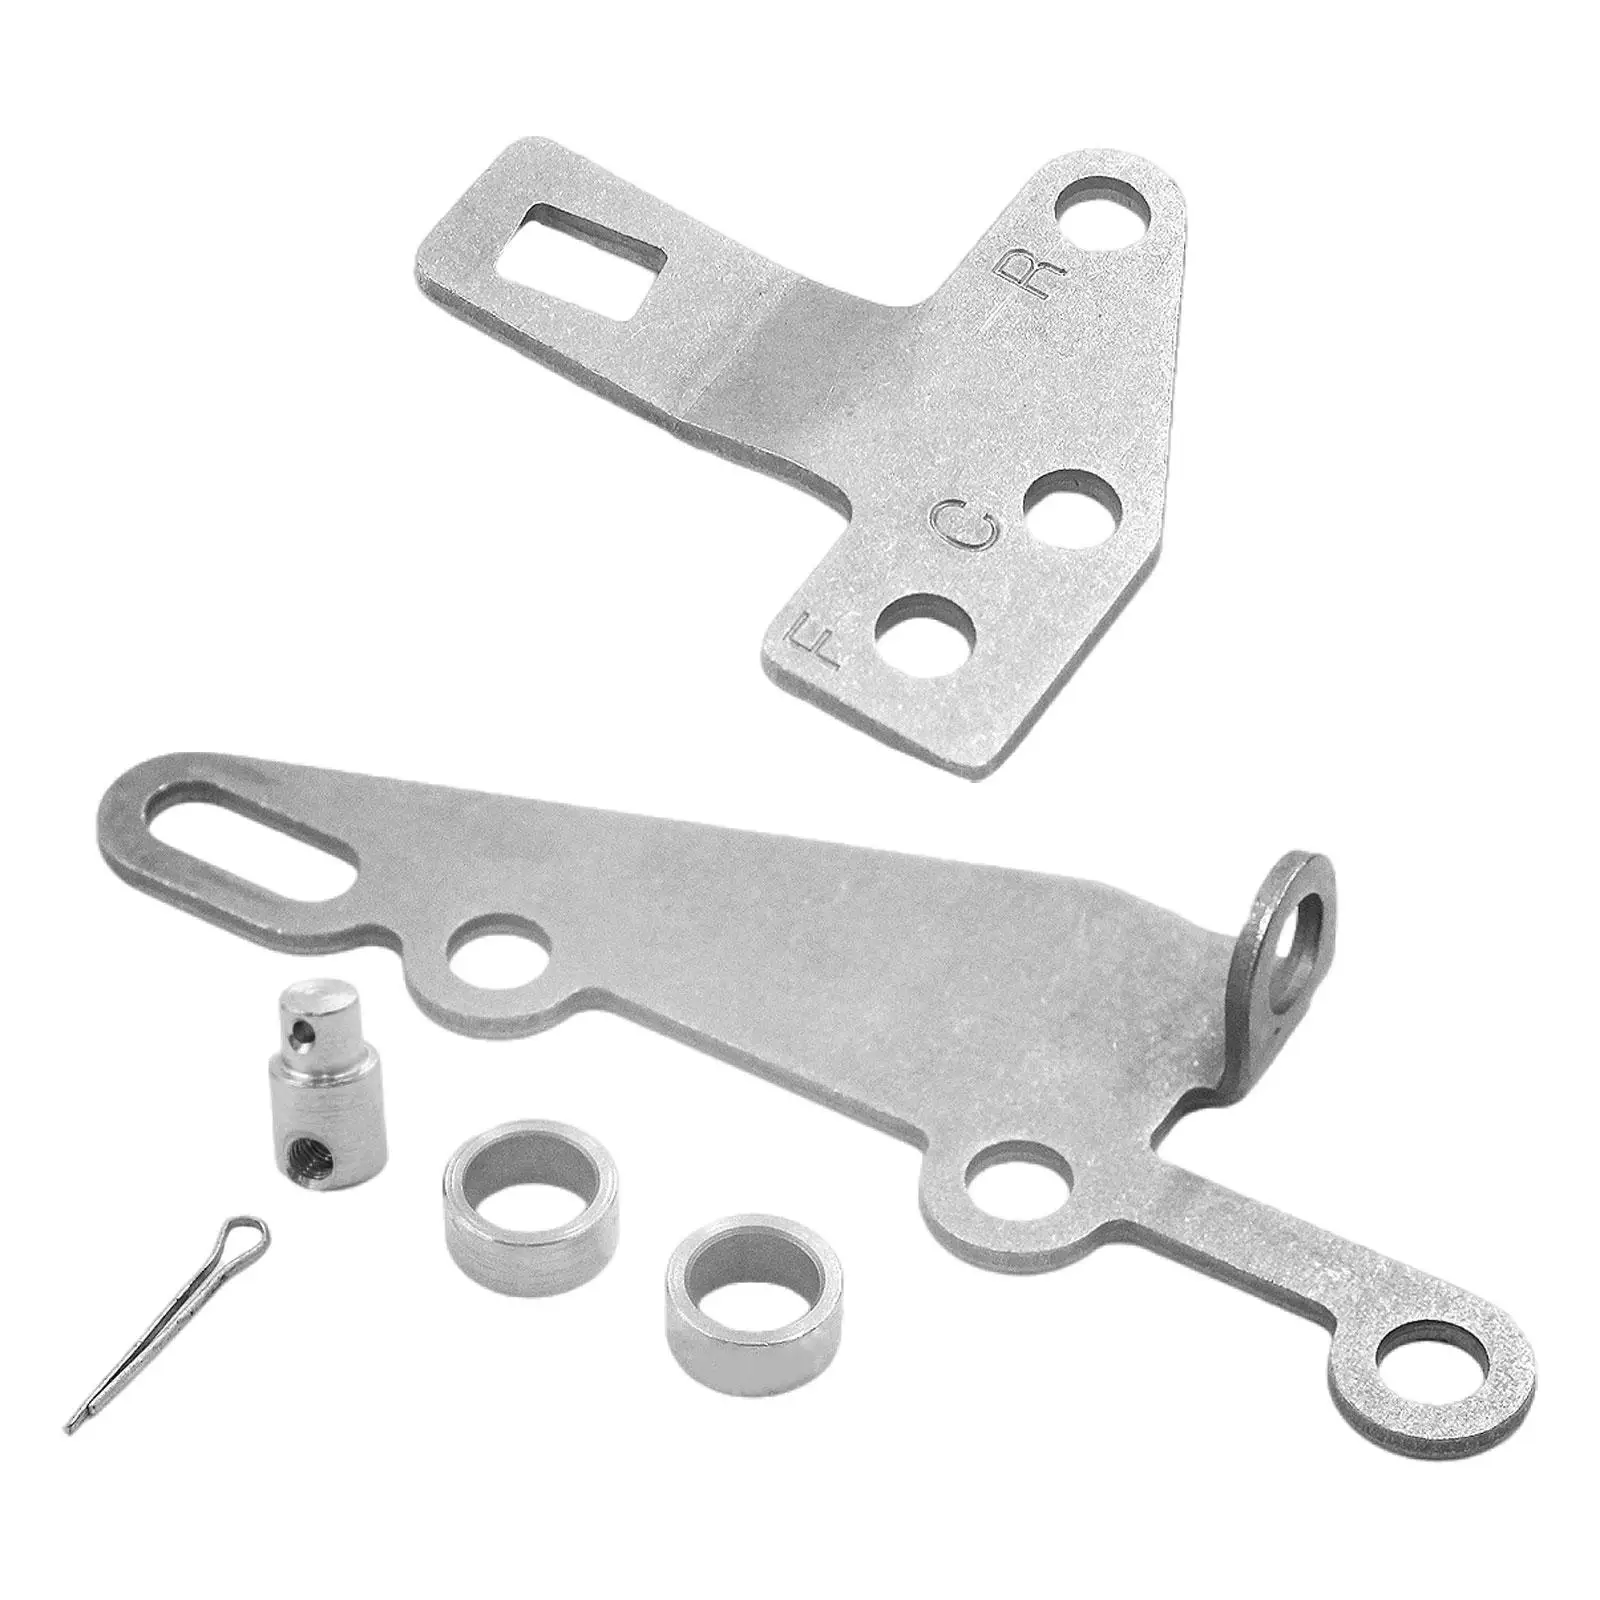 Shifter Bracket Kit 35498 Repair Parts for TH400 TH350 H250/200 TH700-r4 4L60 Easy Installation